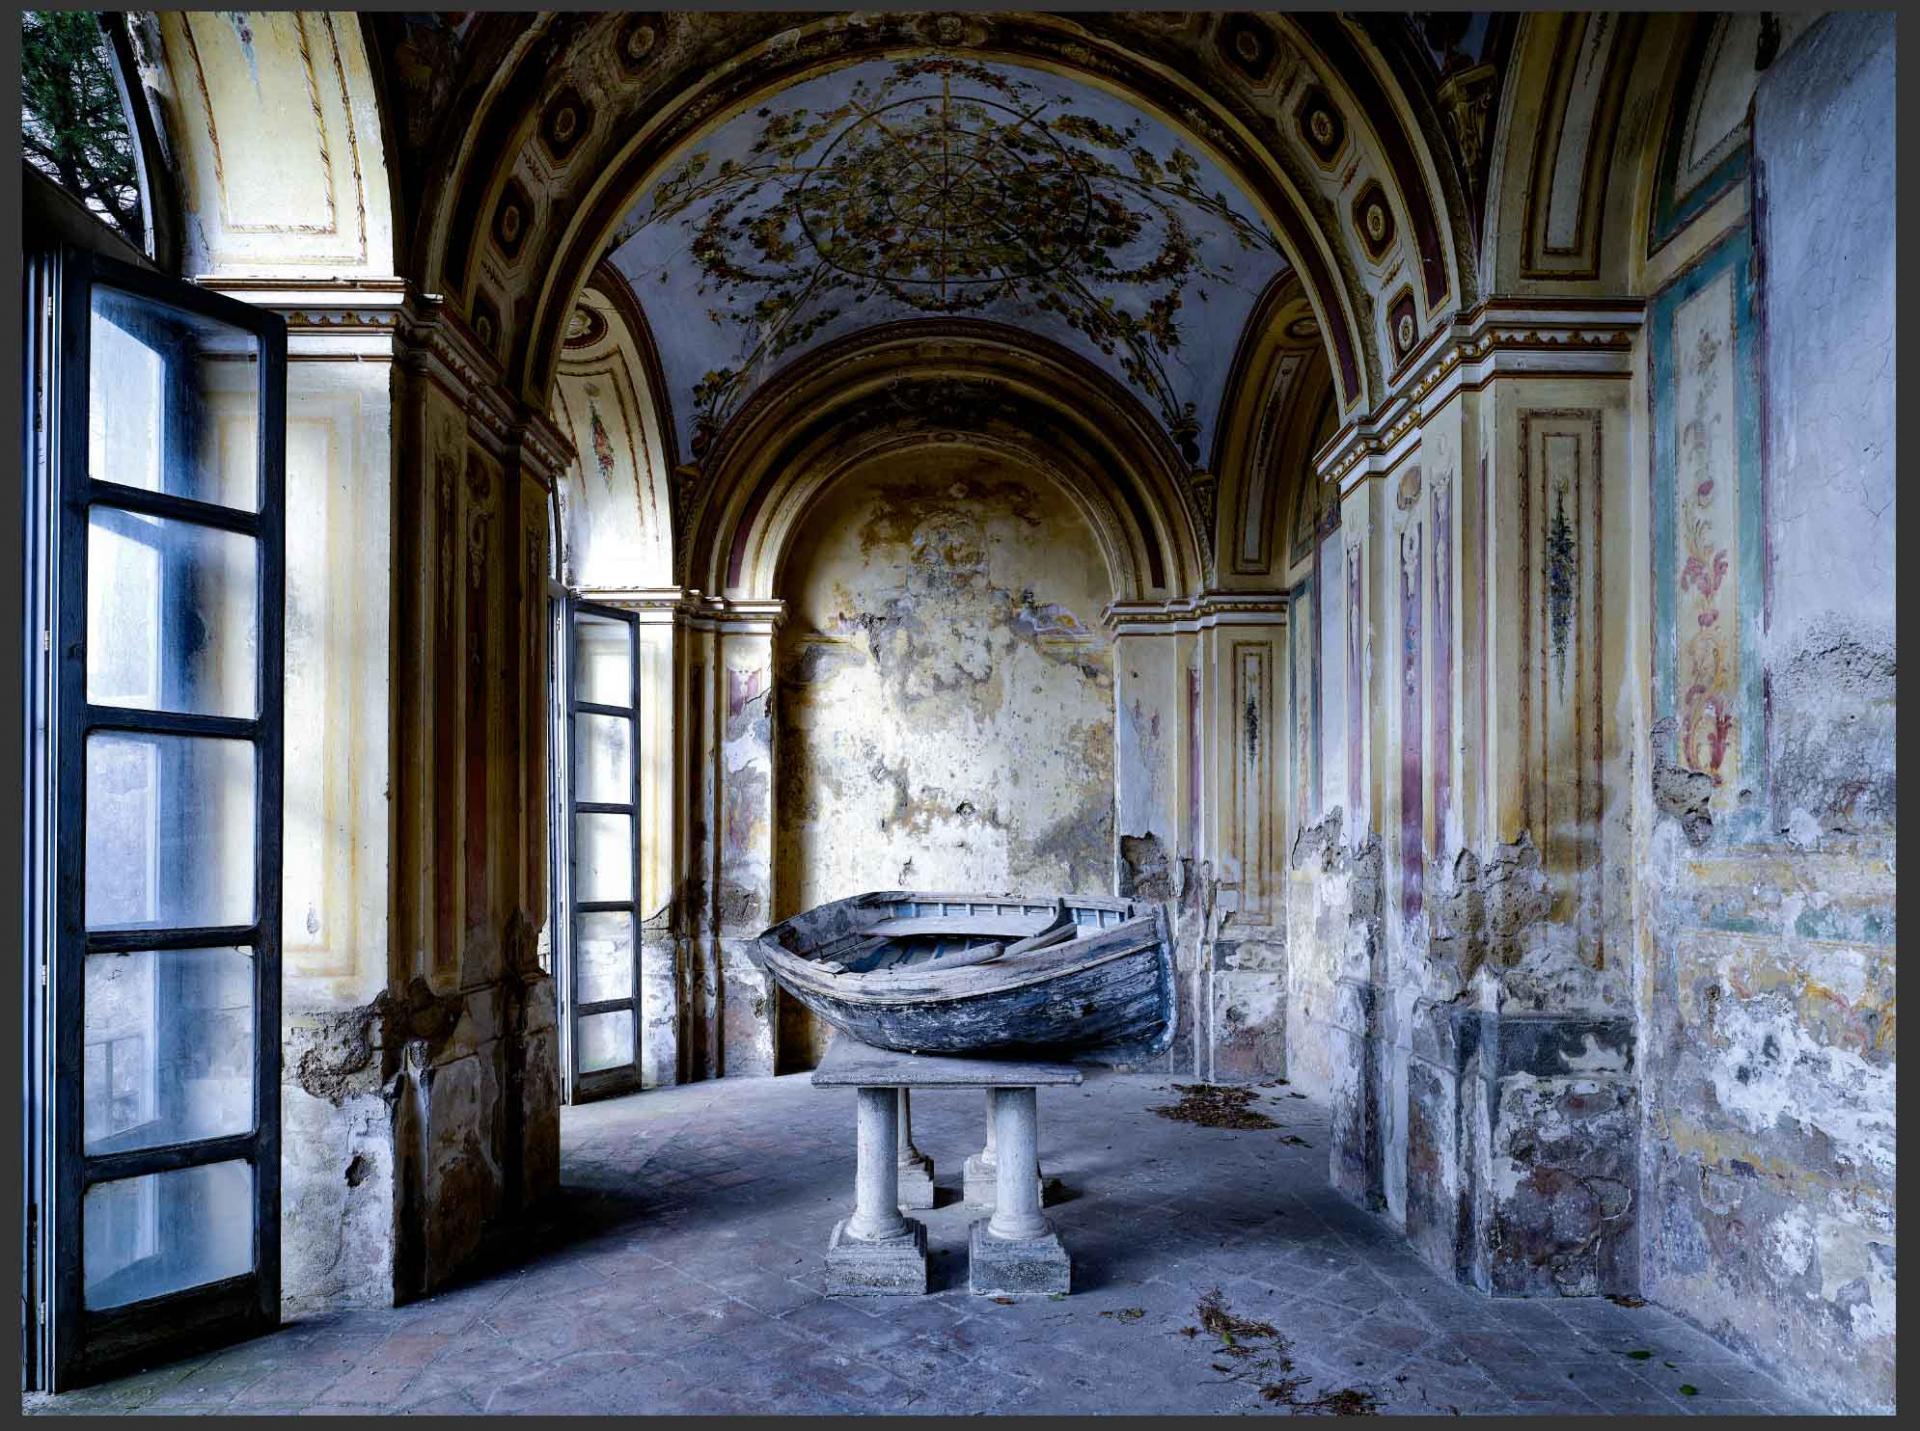 Massimo Listri
Villa Porfidia, Napoli 2020
C print Signed, dated, and numbered on verso label   
Framed and mounted

39.5 x 47.5 inches edition of 5 
47.5 x 59 inches edition of 5 
71 x 88.5 inches edition of 5  

The photographer is based in